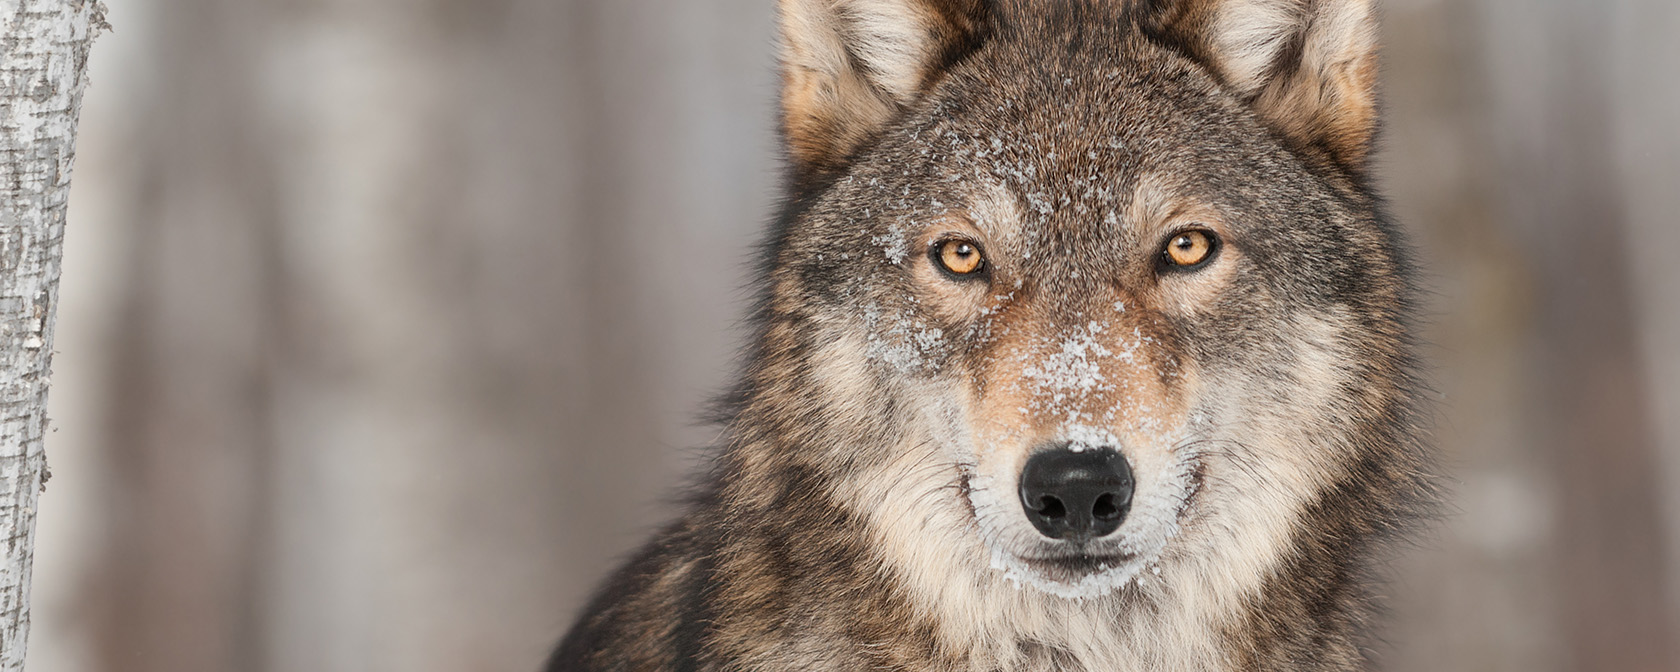 Horrific wolf killing in Wyoming shows urgent need for increased protections